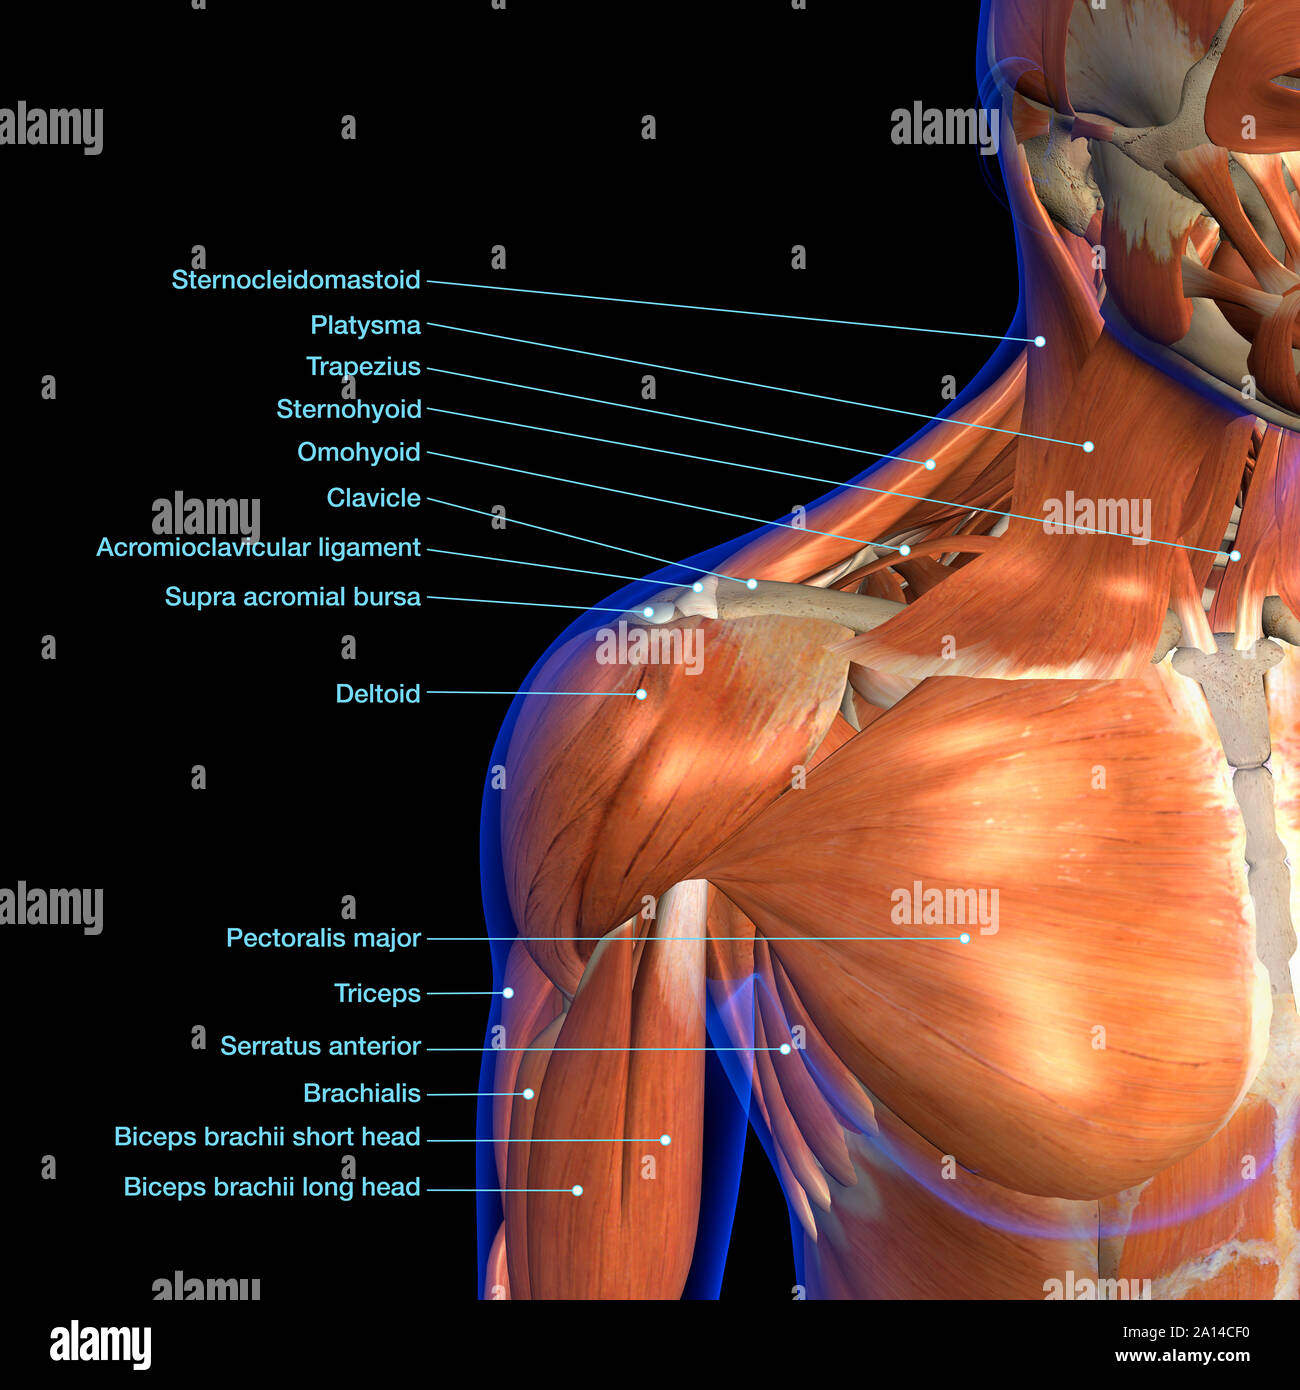 Labeled anatomy chart of neck and shoulder muscles, on black background. Stock Photo